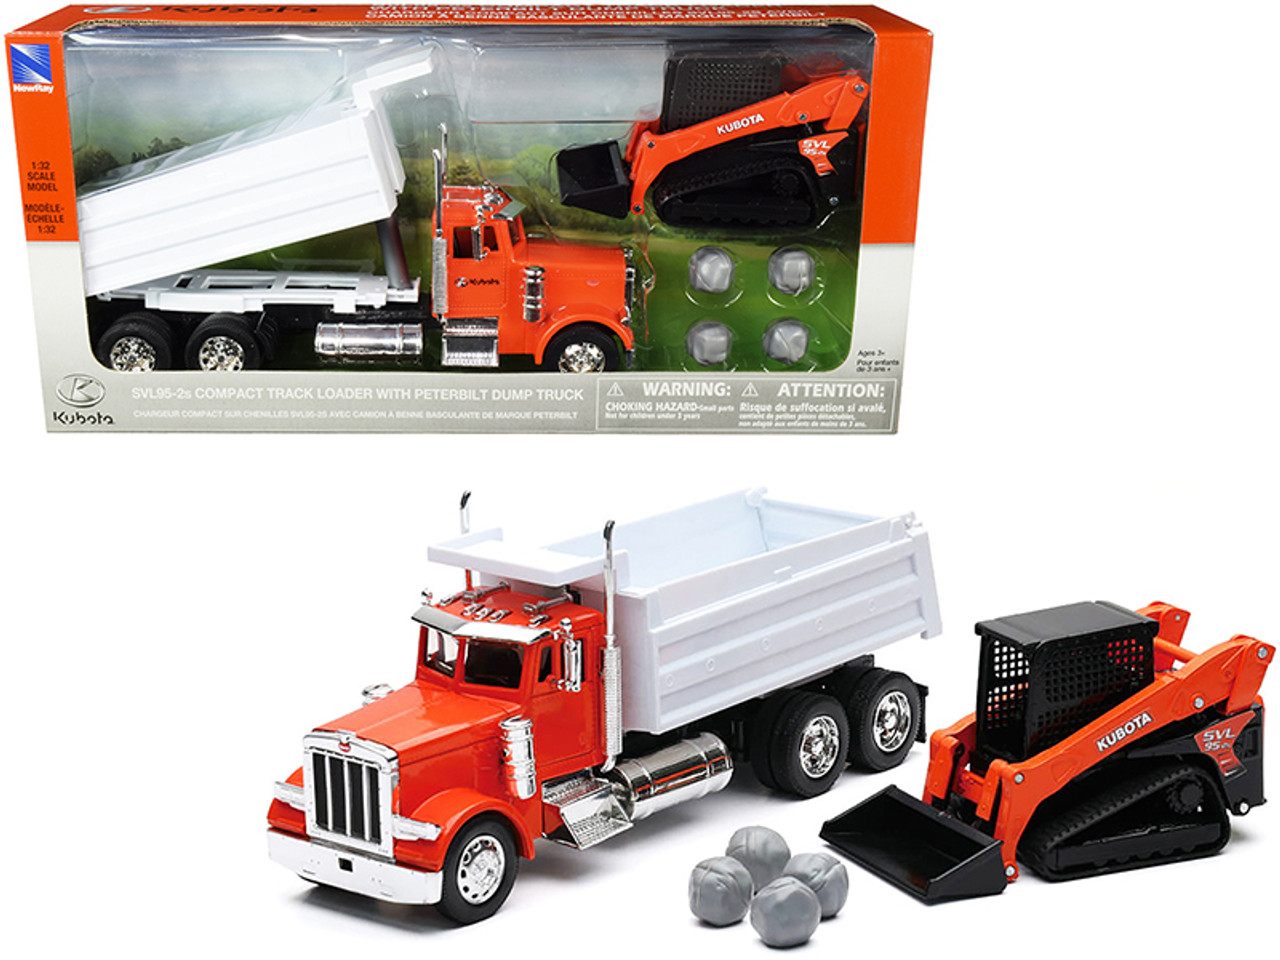 Peterbilt Dump Truck "Kubota" Orange and White with Kubota SVL95-2s Compact Track Loader Orange and Black and Boulders Set of 2 pieces 1/32 Diecast Models by New Ray